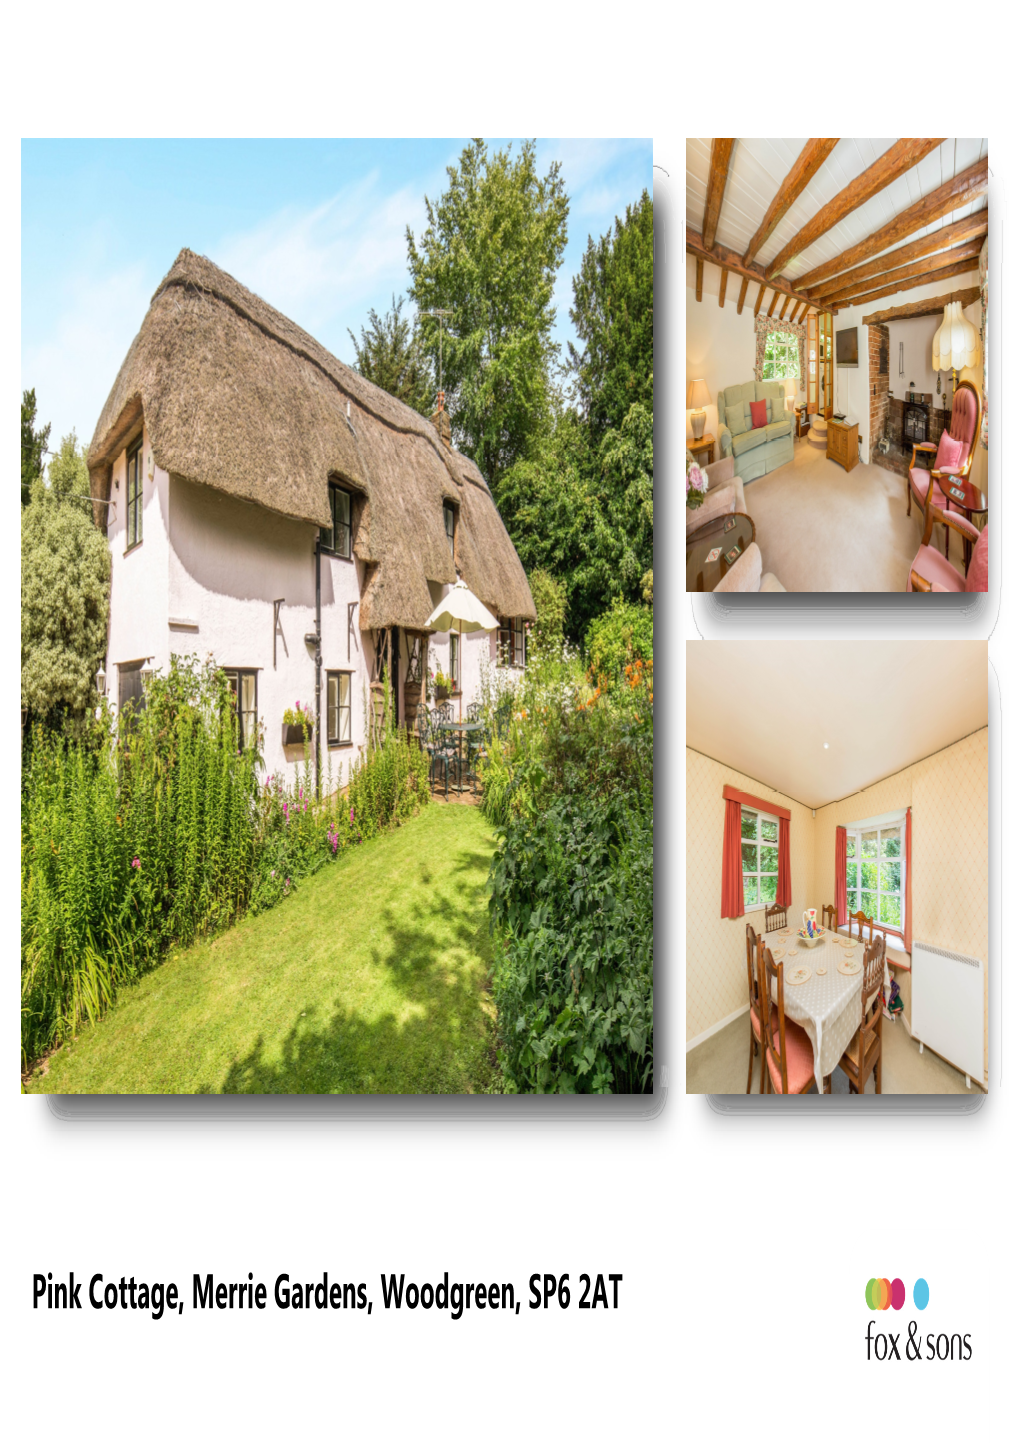 Pink Cottage, Merrie Gardens, Woodgreen, SP6 2AT Welcome To